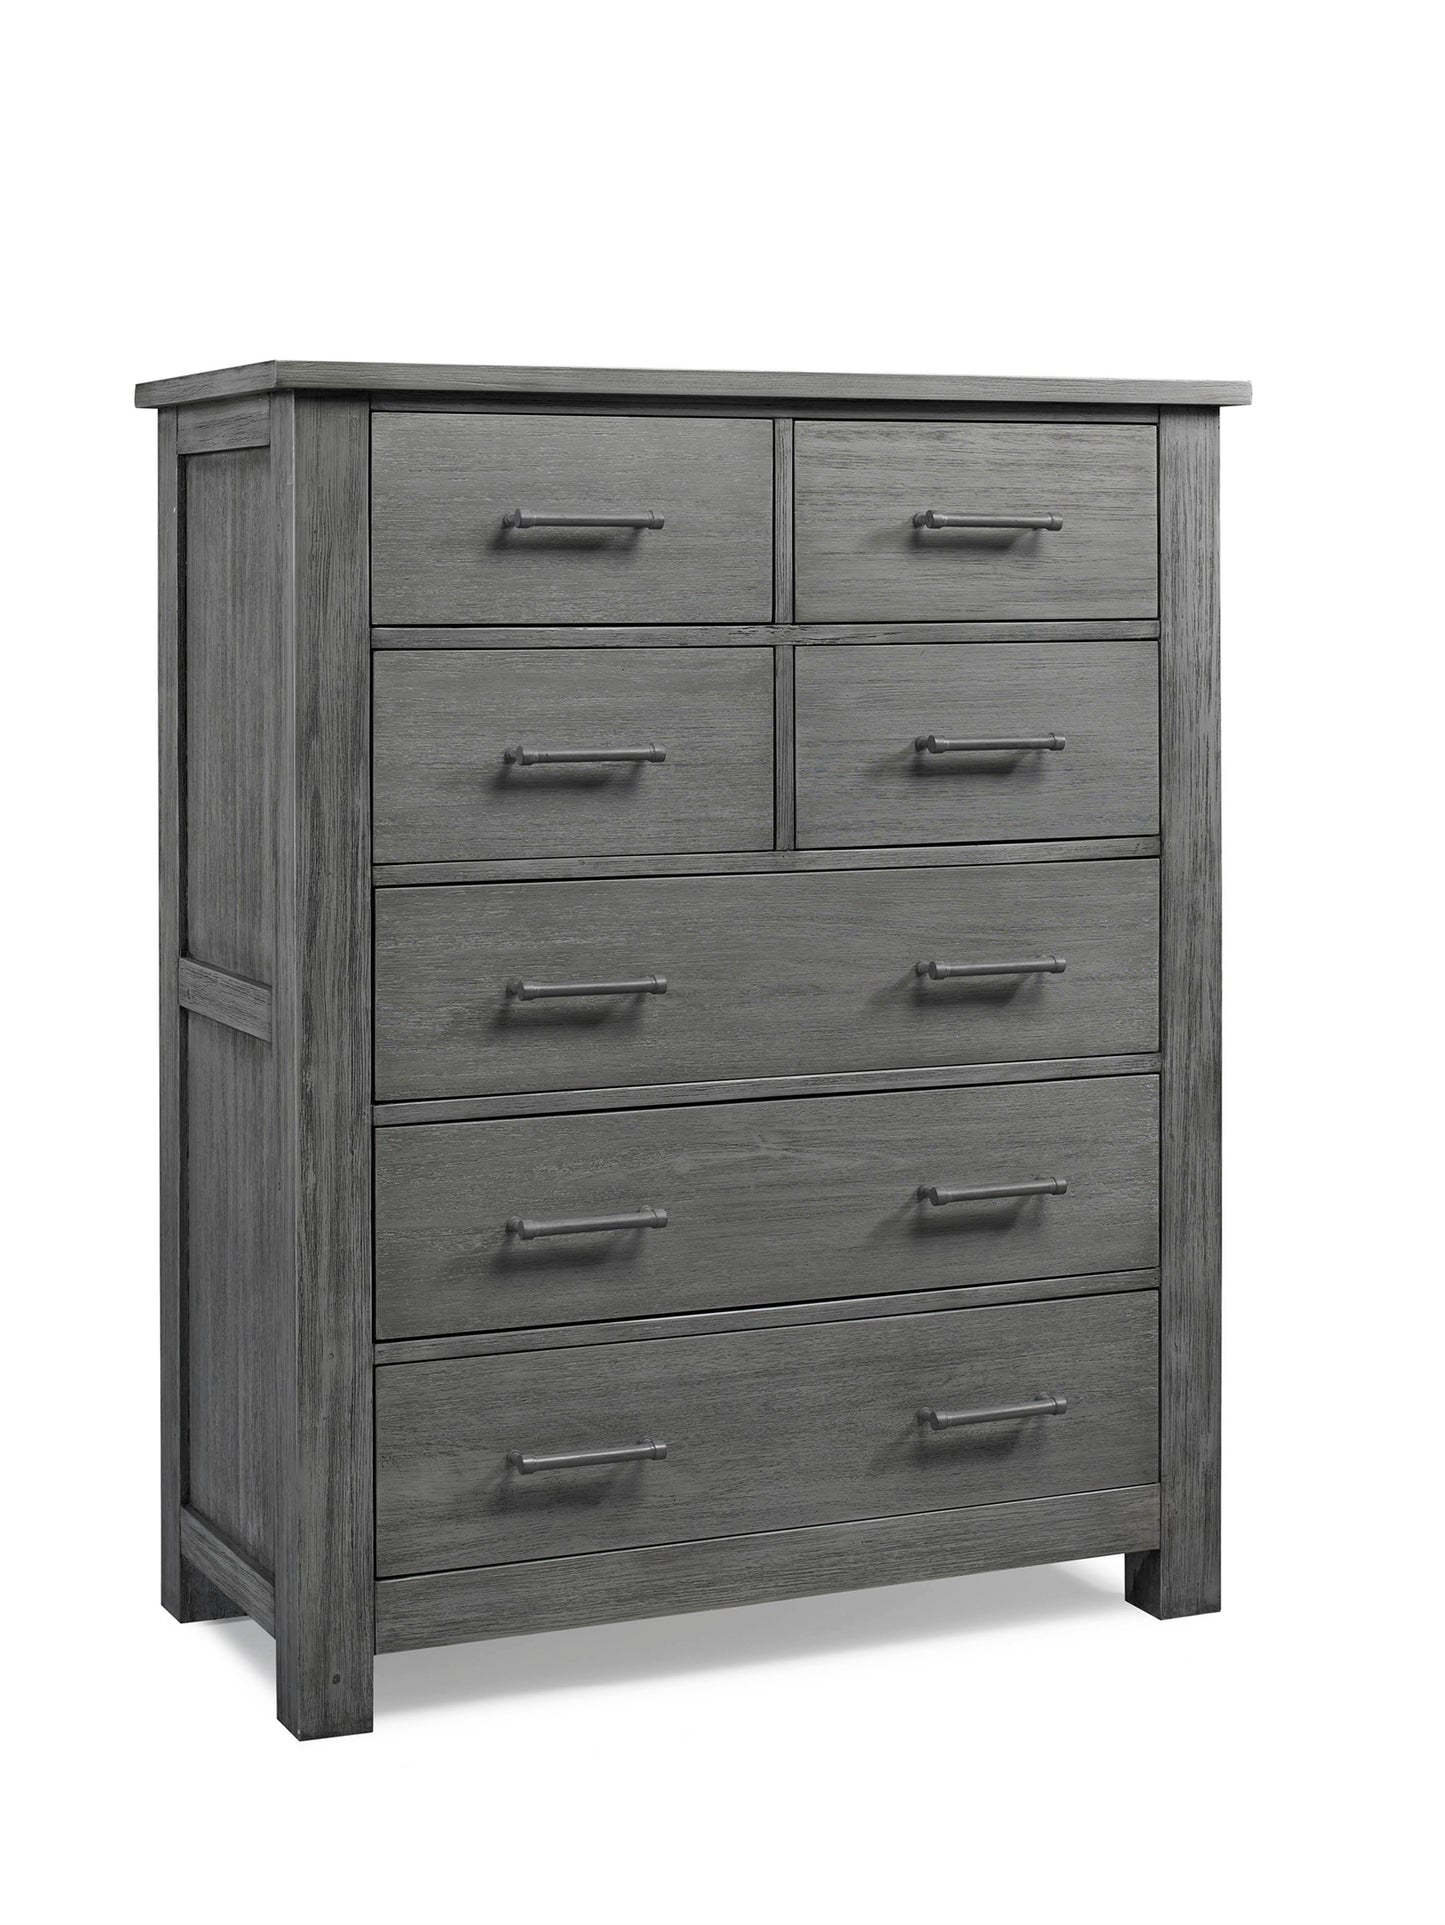 Lucca 7 Drawer Chest - Weathered Grey